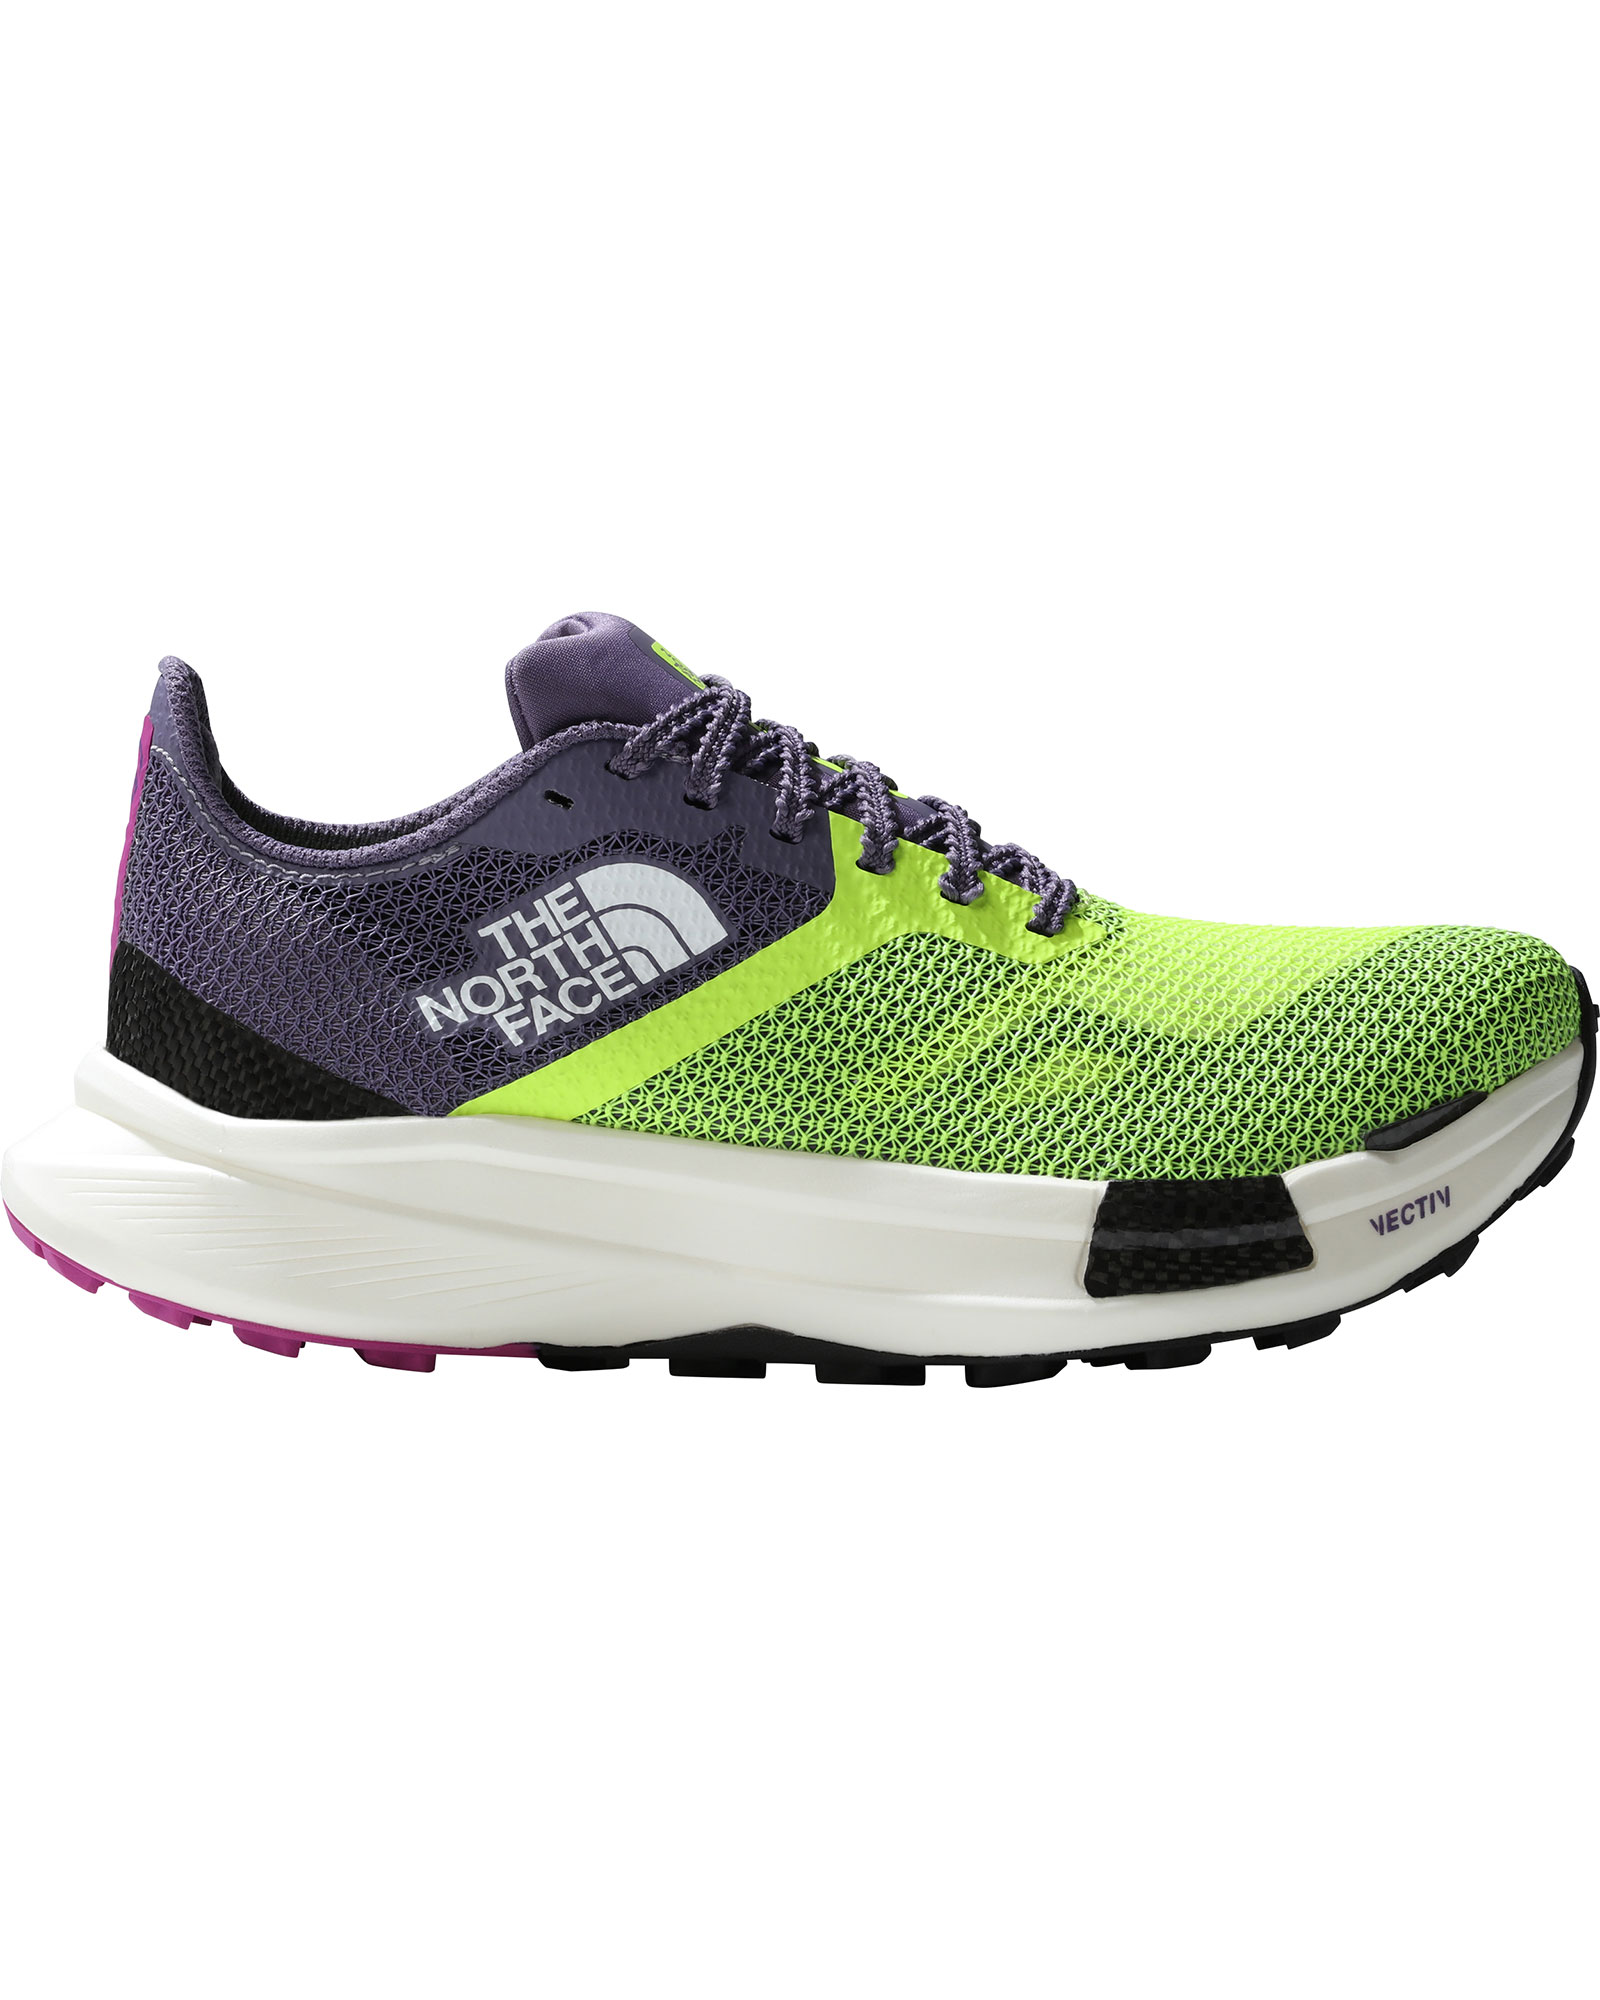 The North Face Summit Vectiv Pro Womens Trail Shoes